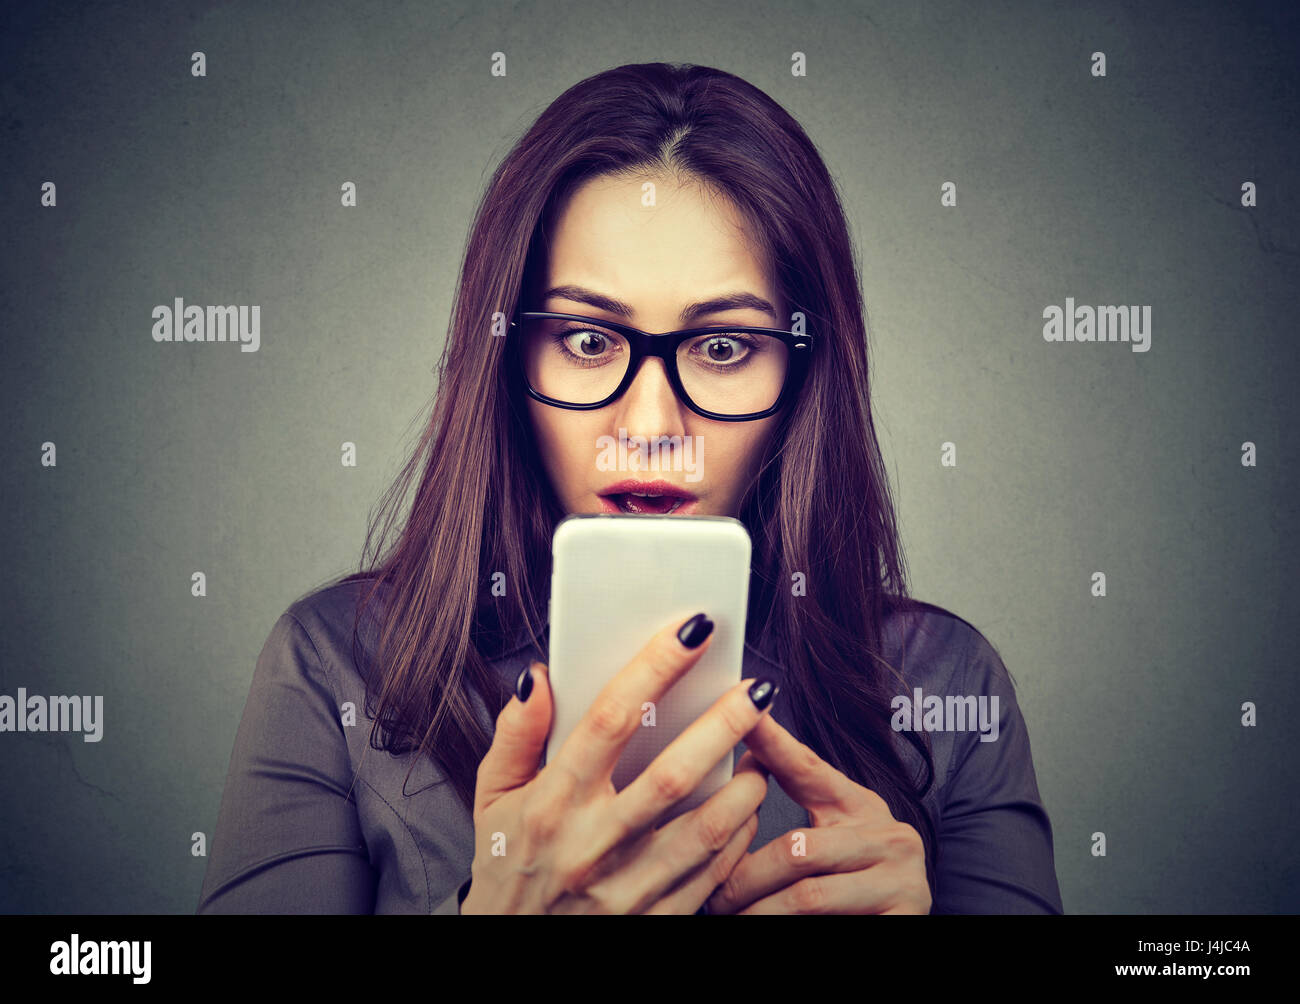 Shocked woman looking at mobile phone isolated on gray background Stock Photo